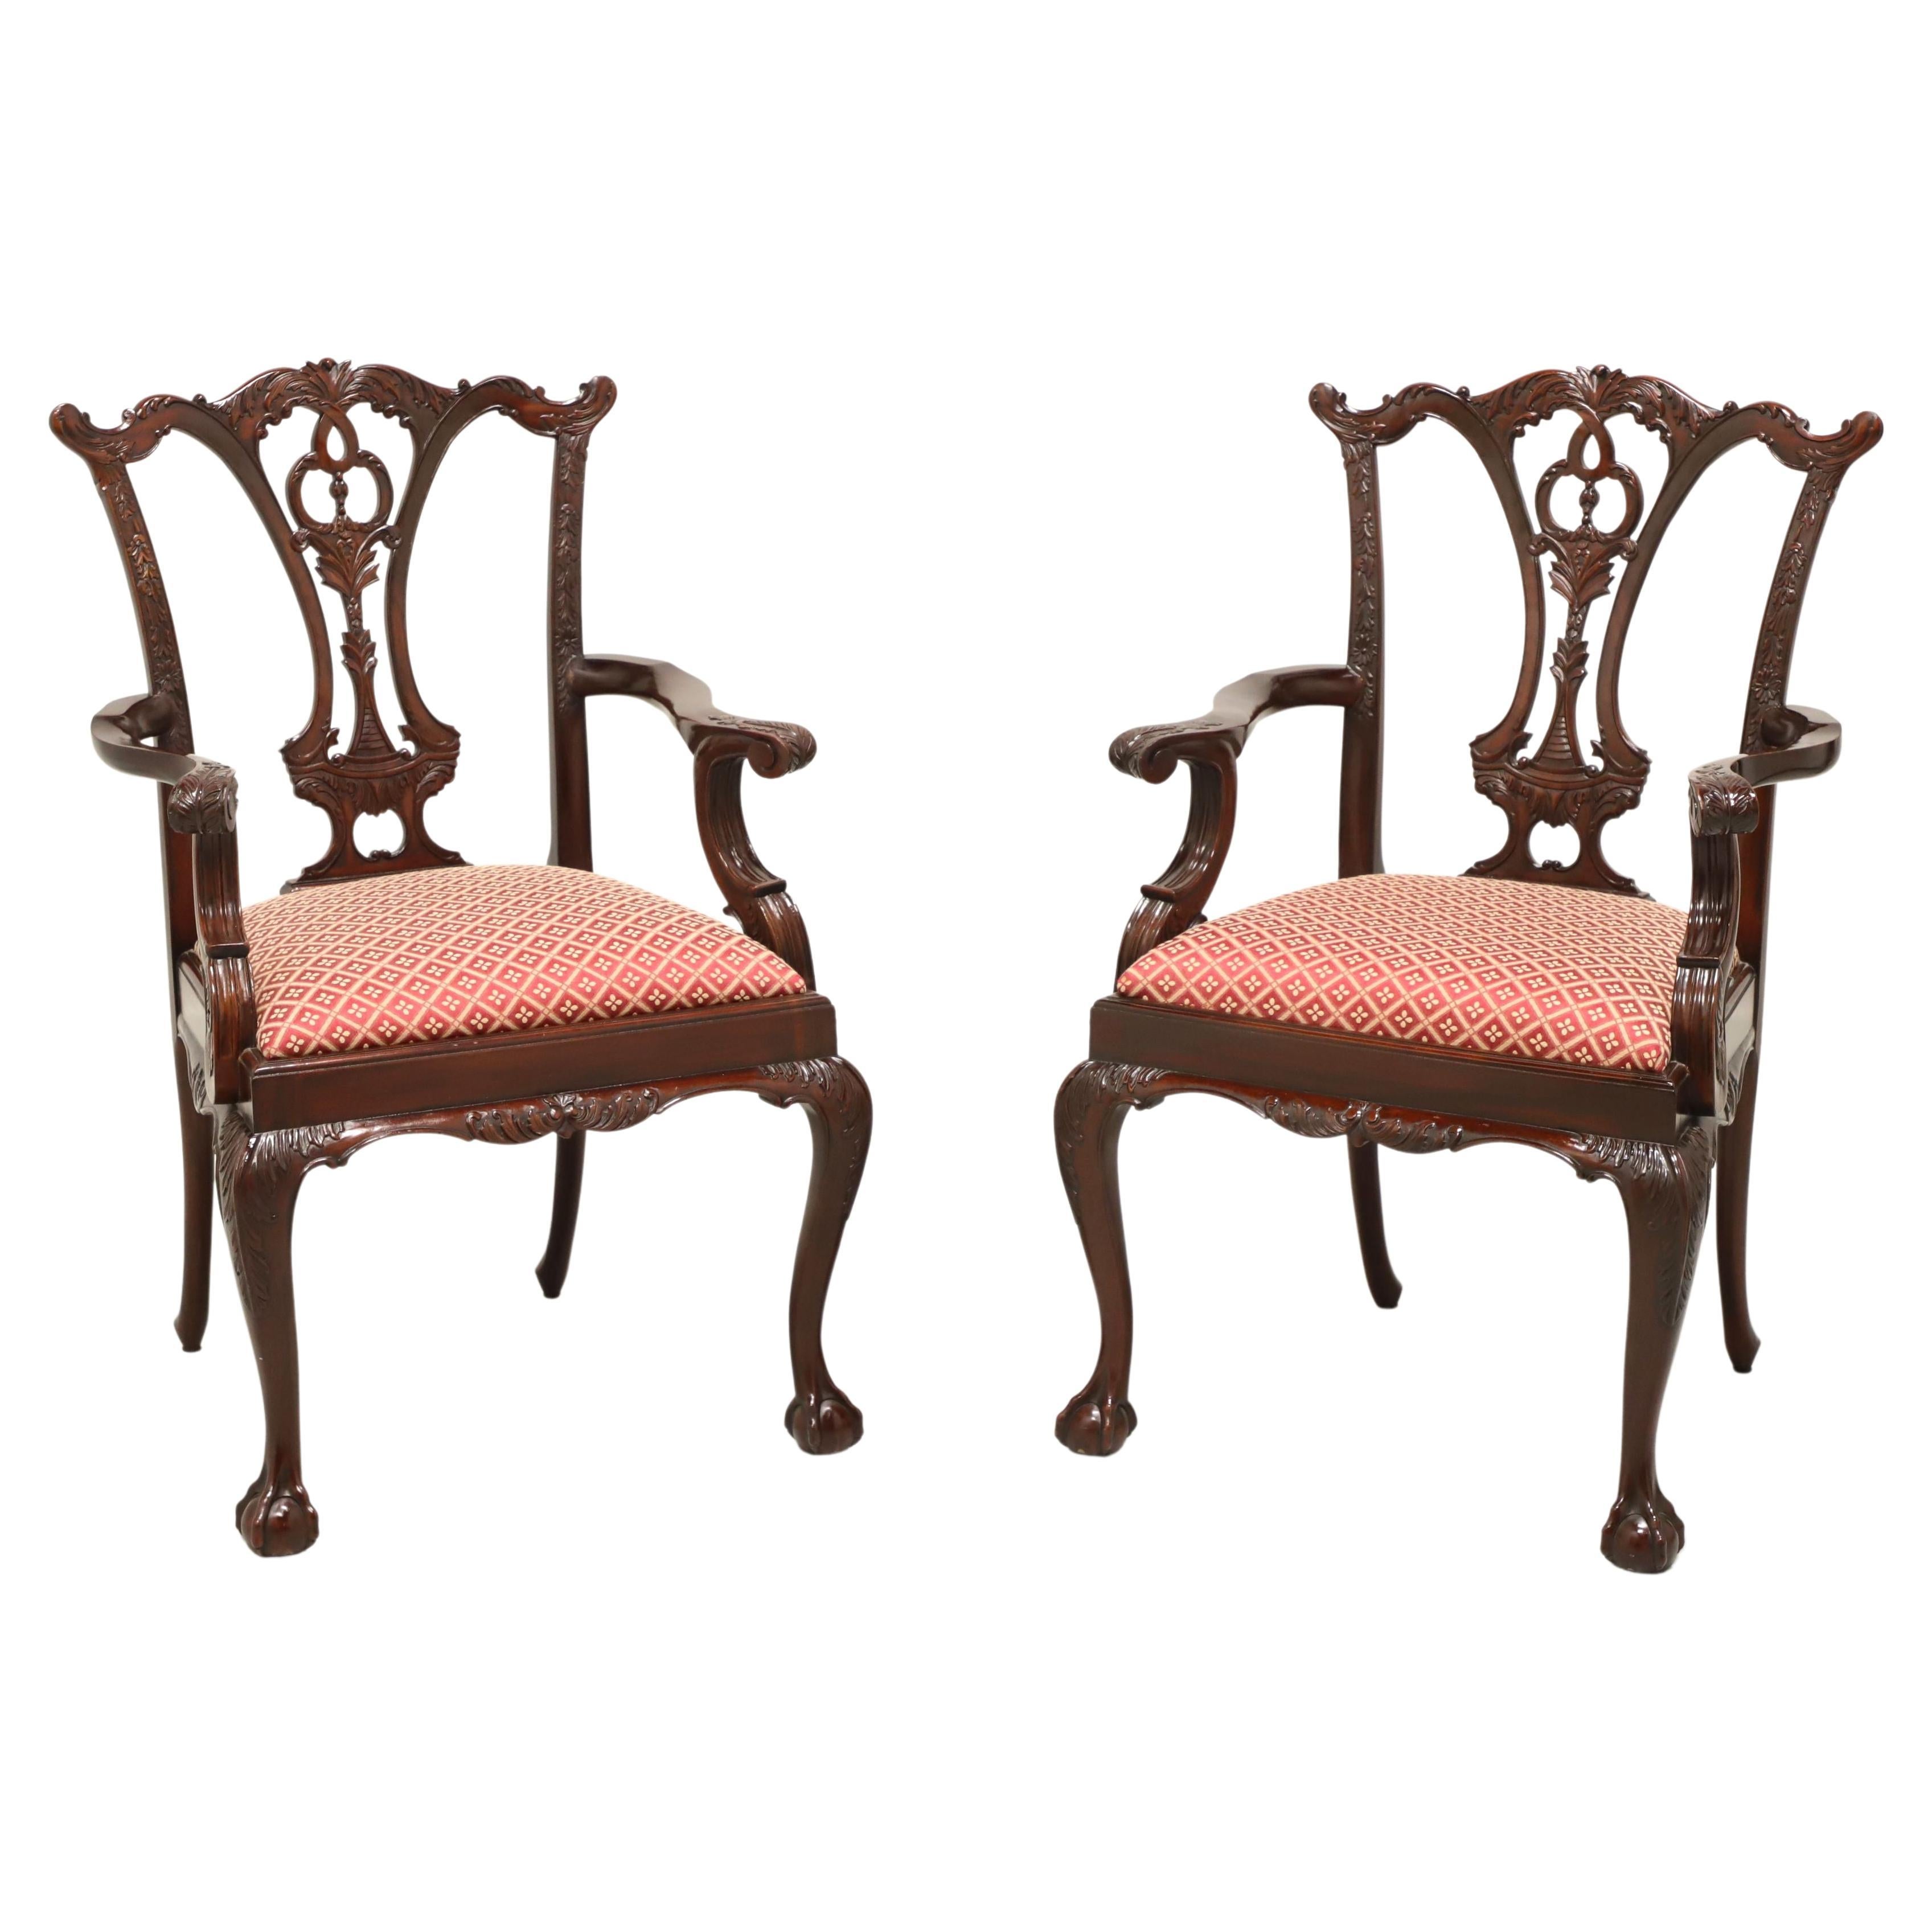 MAITLAND SMITH Mahogany Chippendale Ball in Claw Dining Armchairs - Pair